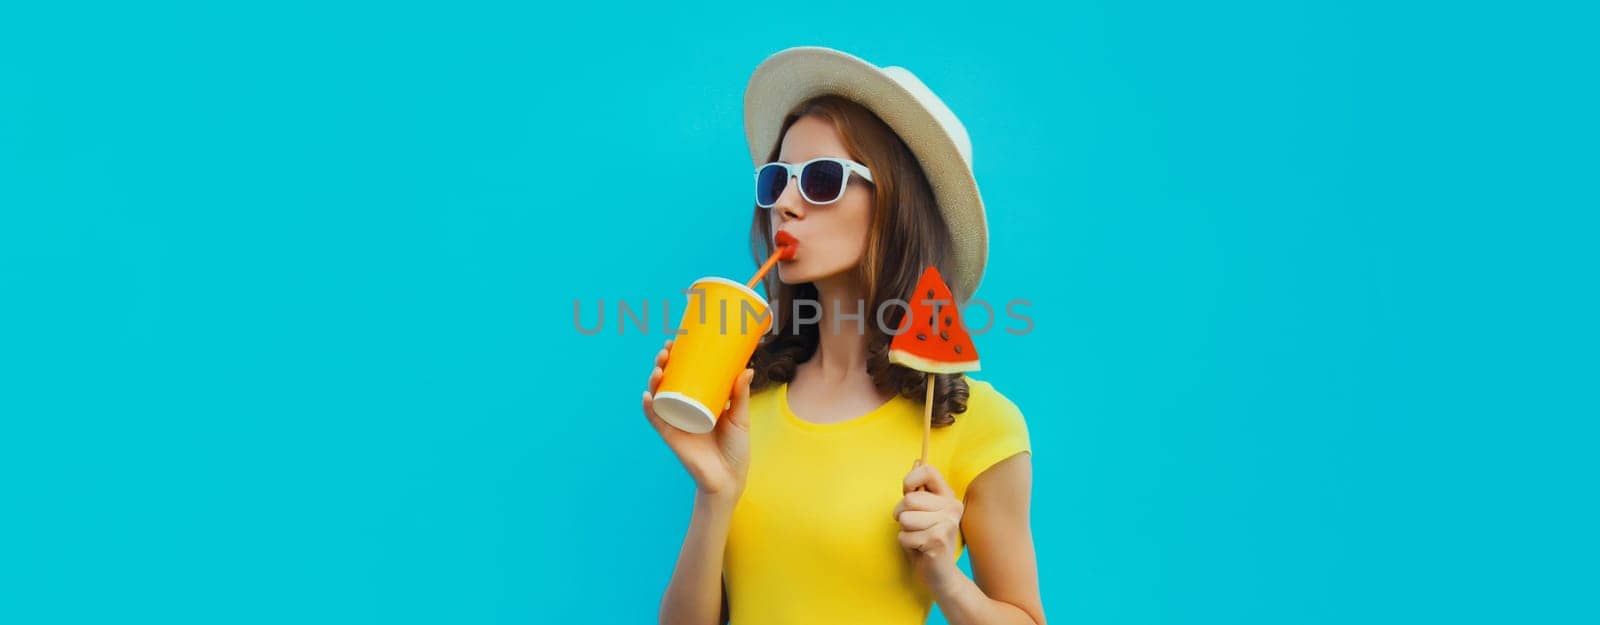 Summer portrait of young woman drinking juice with lollipop watermelon on blue background by Rohappy